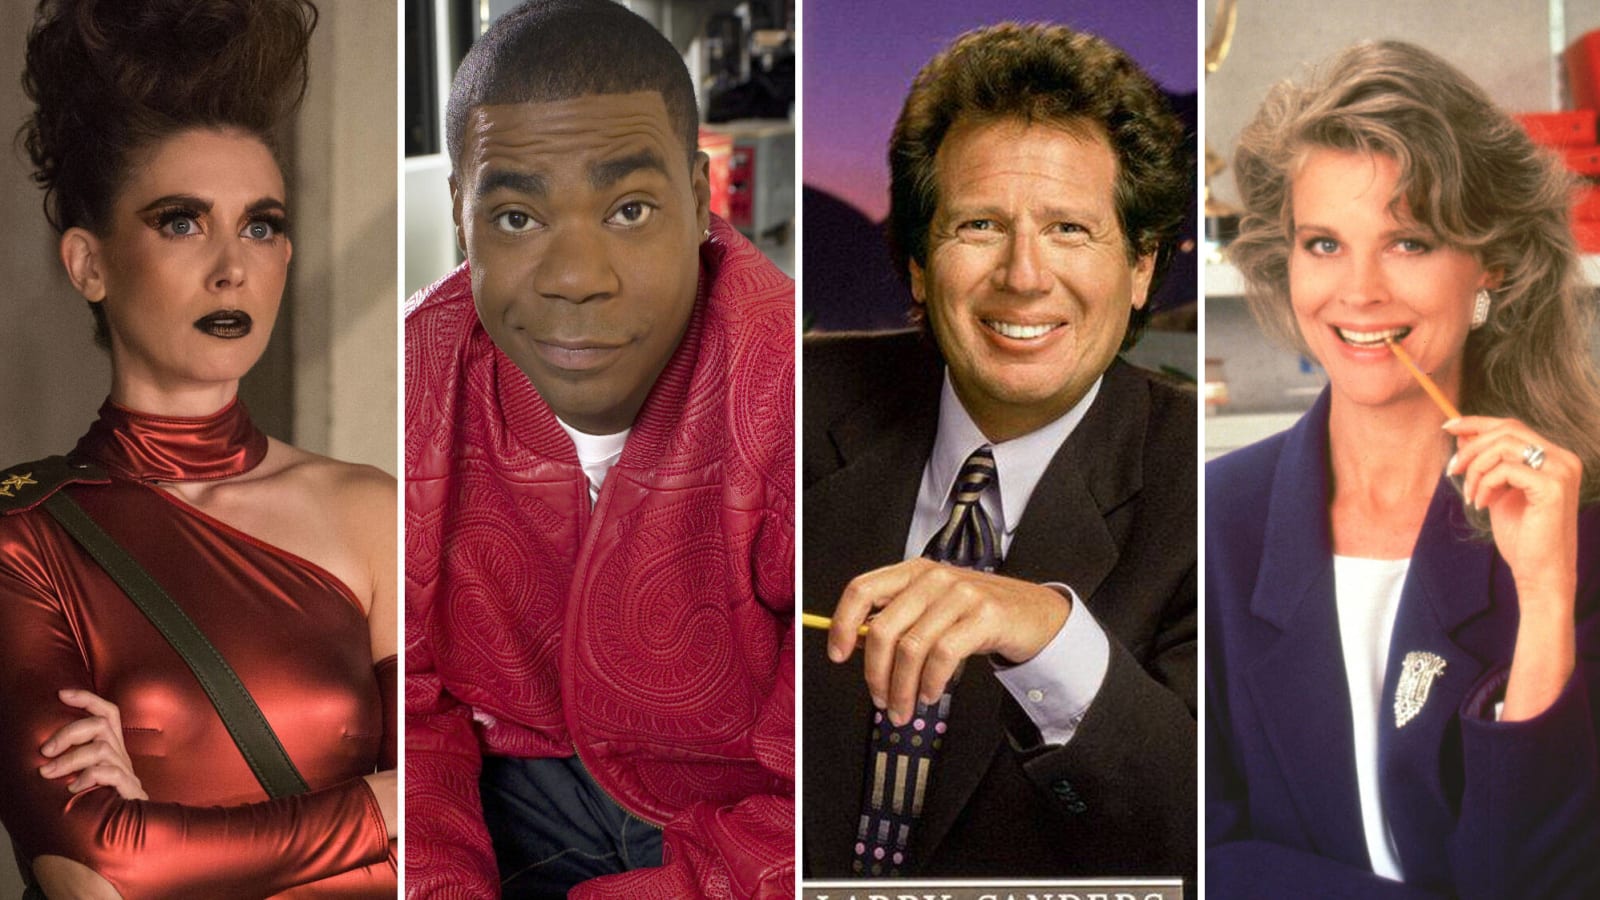 The 20 best TV shows about making TV shows